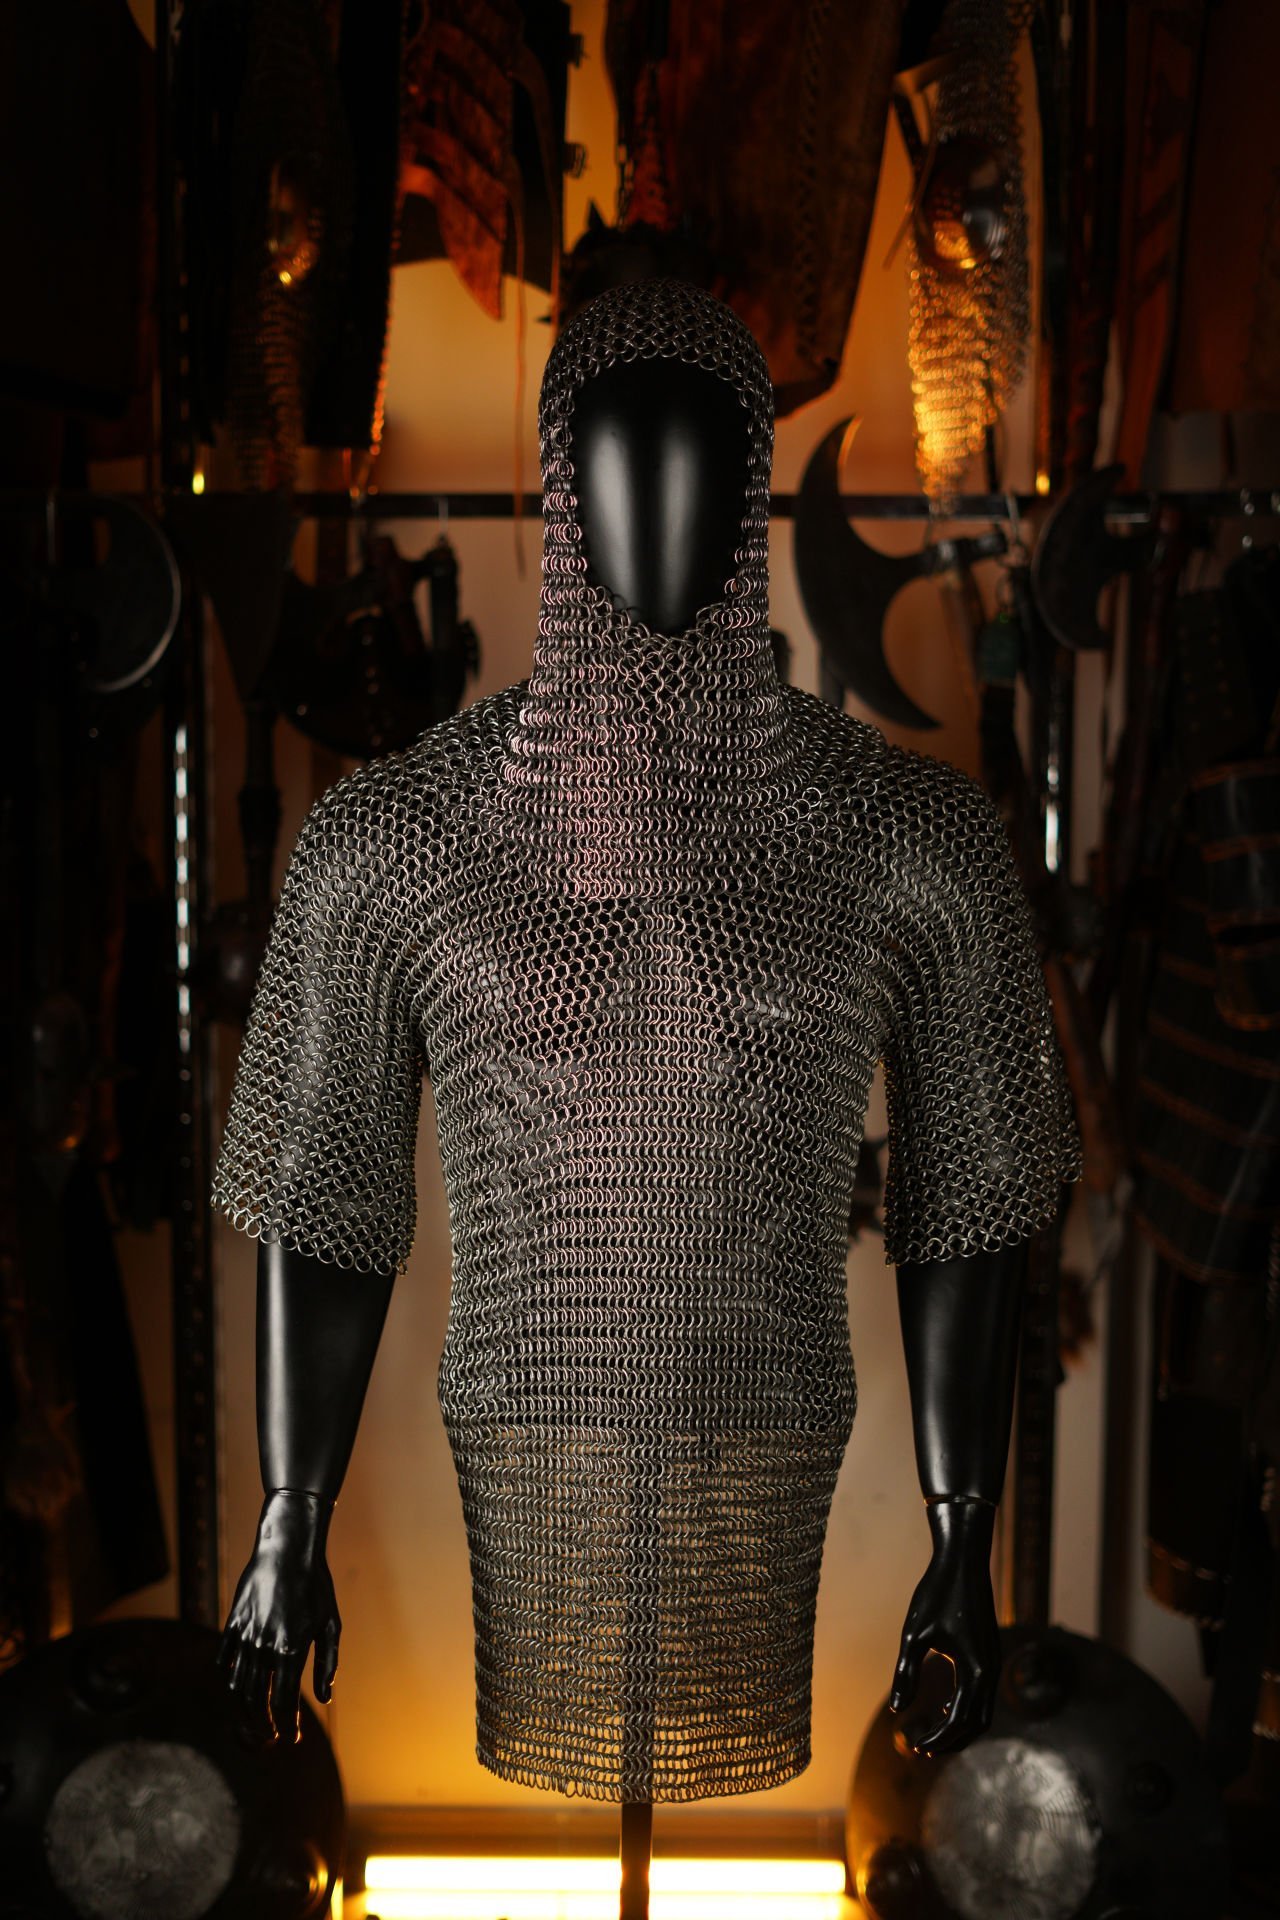 Steel Armor Outfit (Matte Silver)